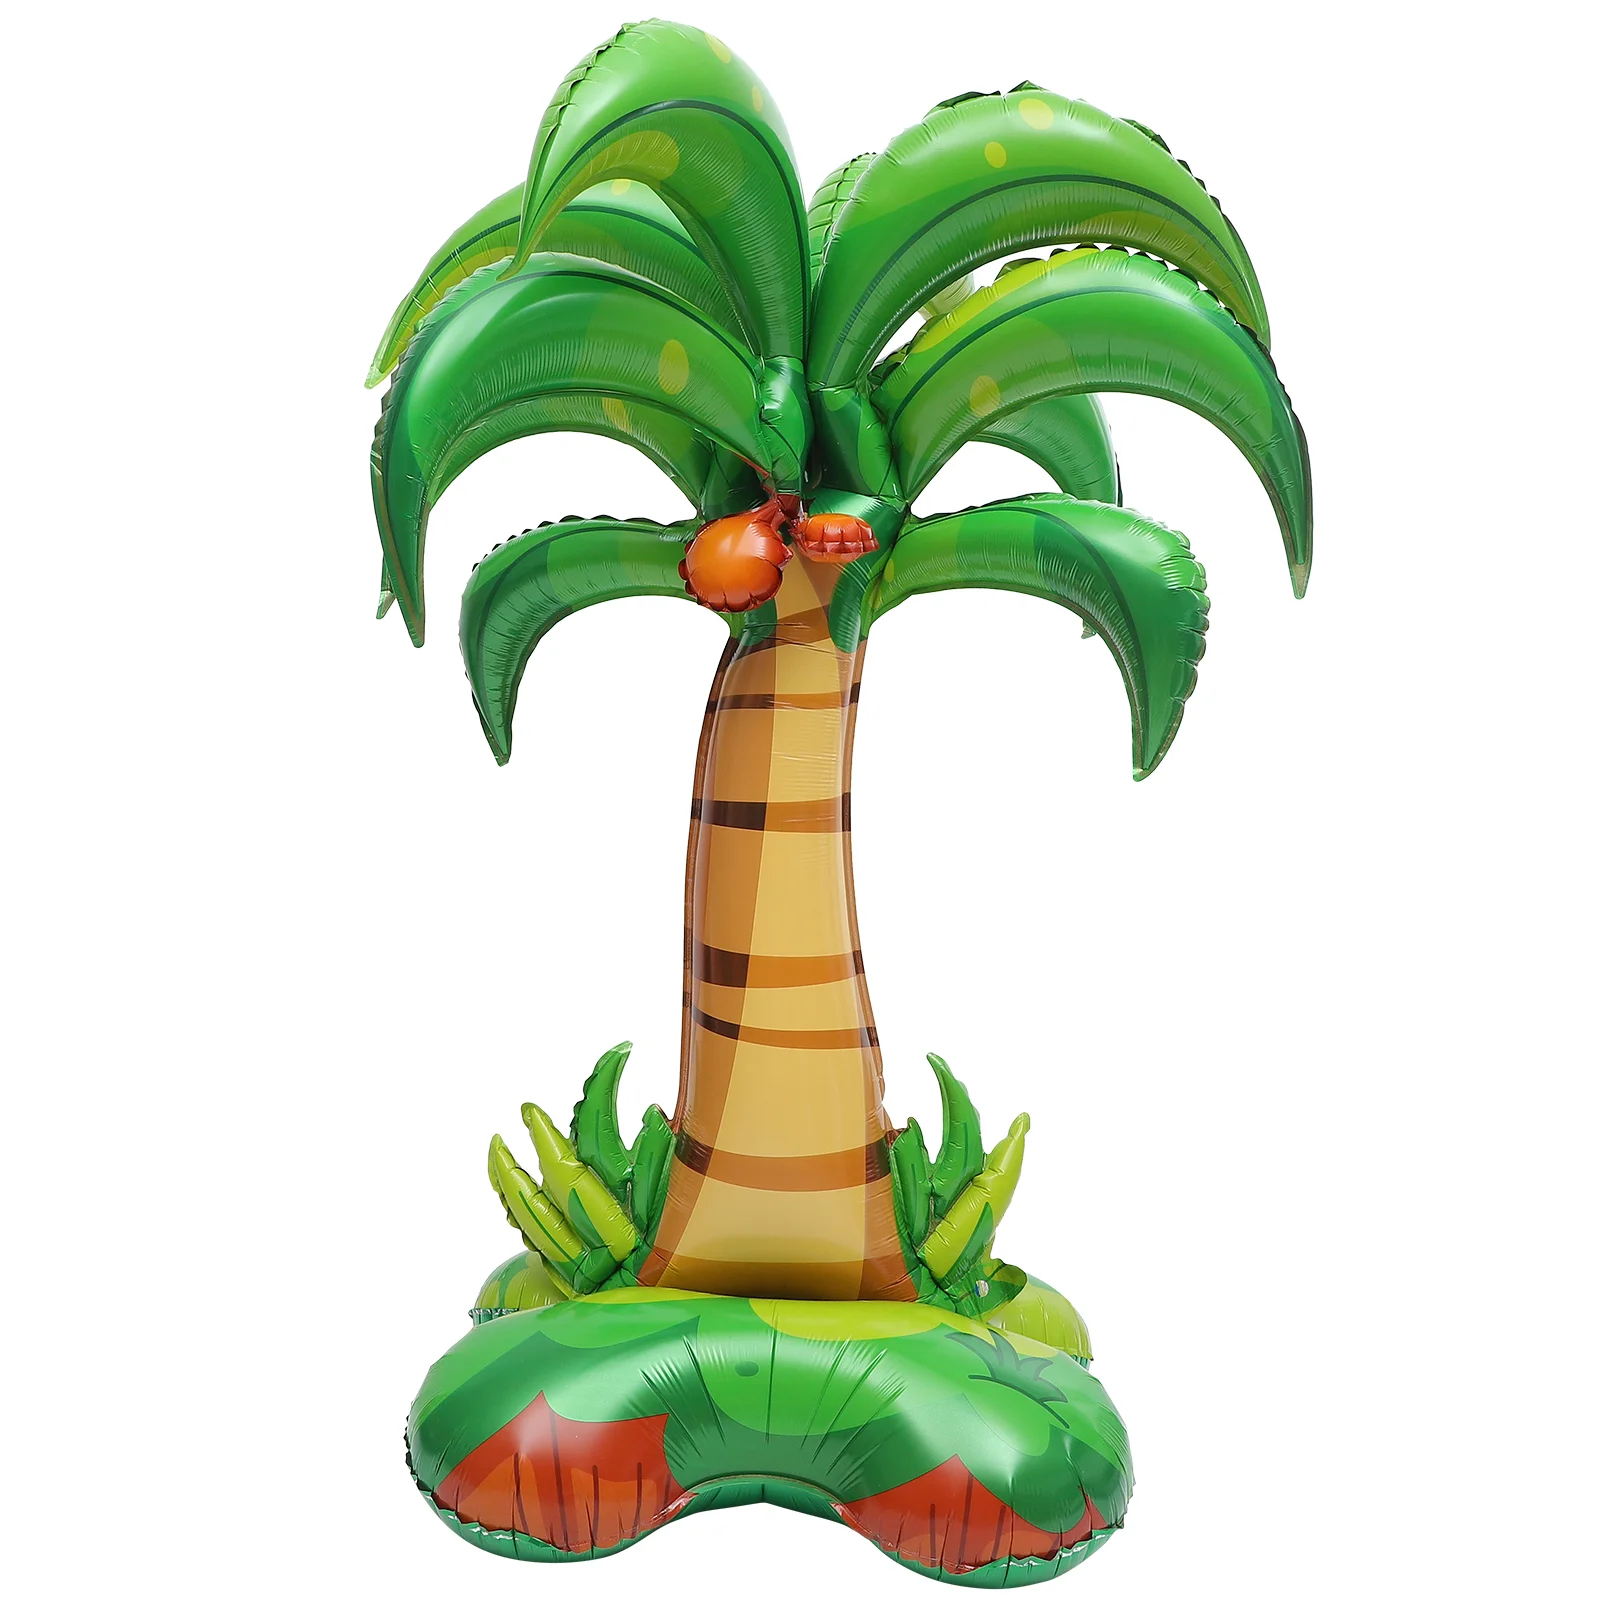 

Coconut Balloons Jumbo Inflatable Palm Trees Giant Trees Balloons Pool Float Luau Hawaiian Tropical Party Decorations Summer